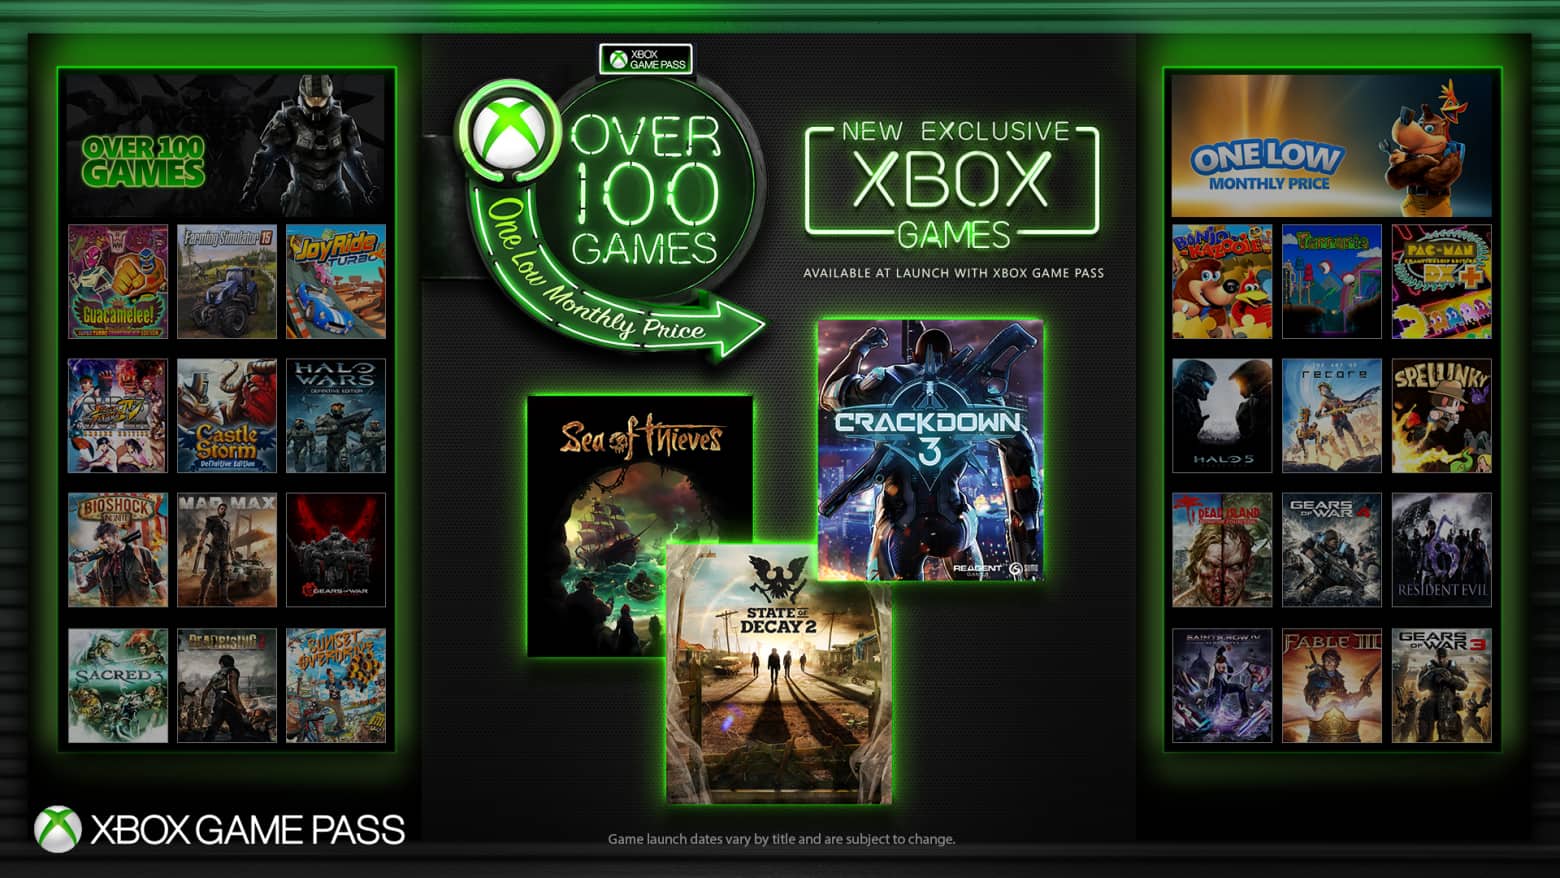 Xbox Game Pass now includes New Releases from Microsoft Studios